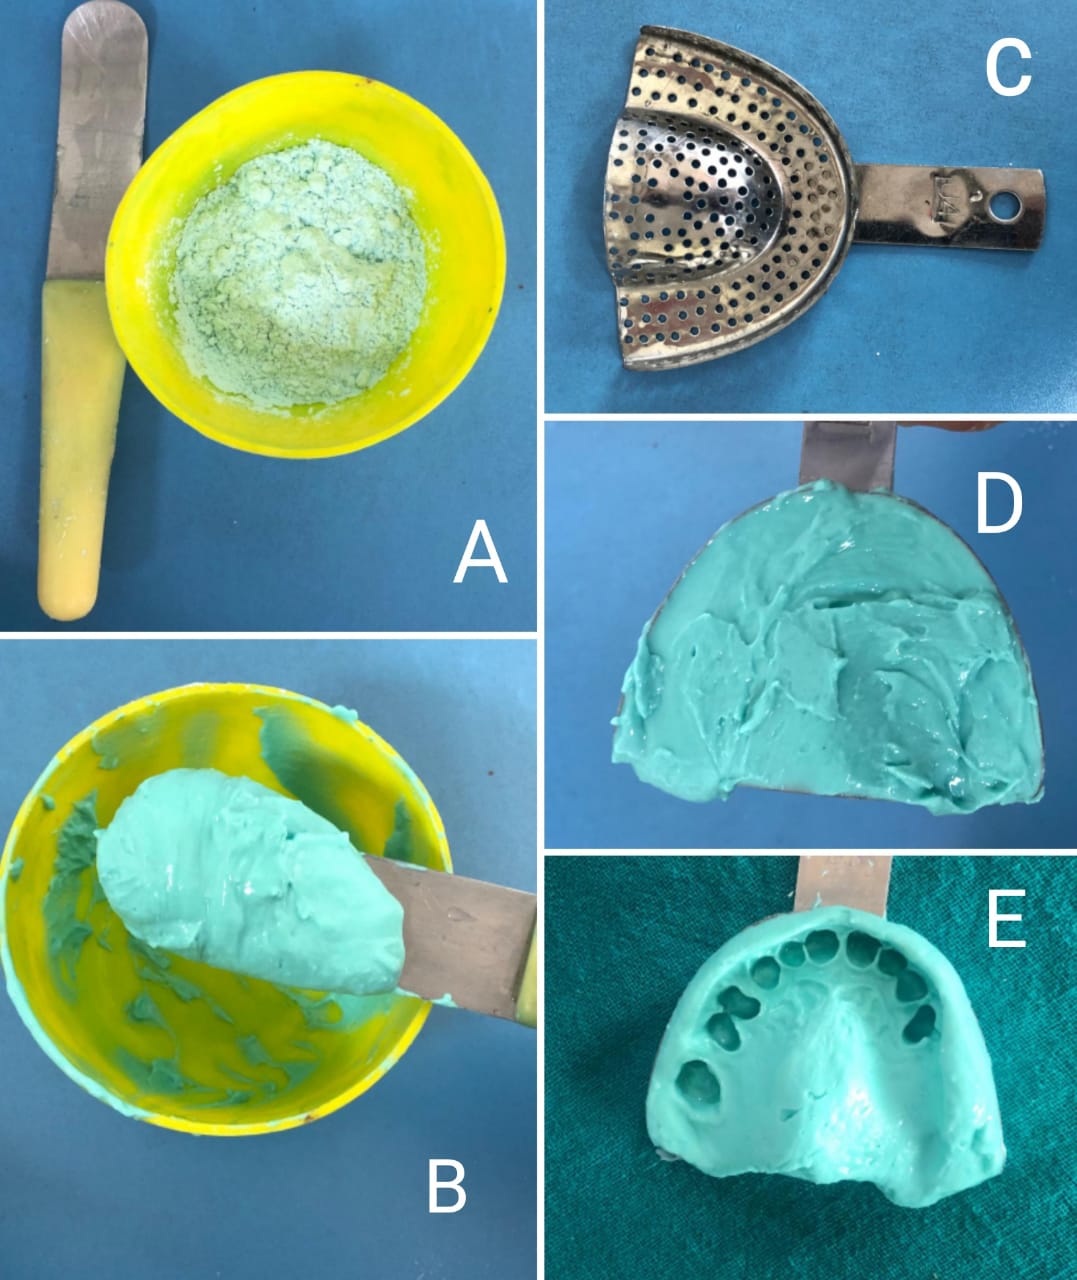 Mixing of alginate for impression making: A) Measured amount of alginate powder in flexible rubber bowl and a curved spatula,